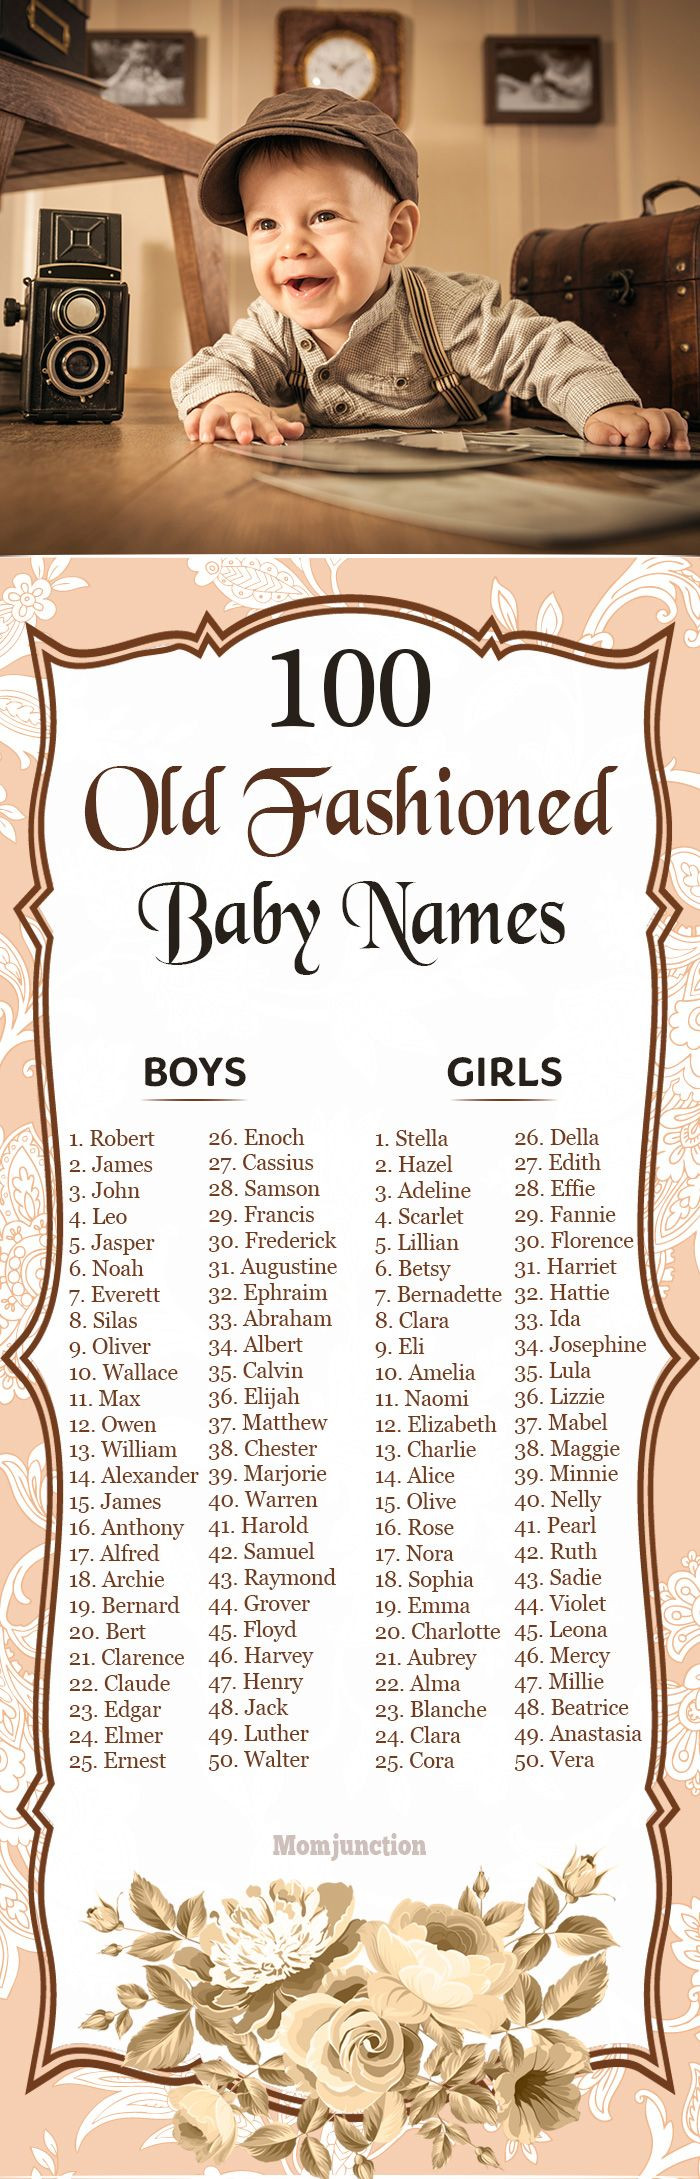 Old Fashion Baby Girl Names
 100 Amazing Old Fashioned Baby Names For Boys And Girls